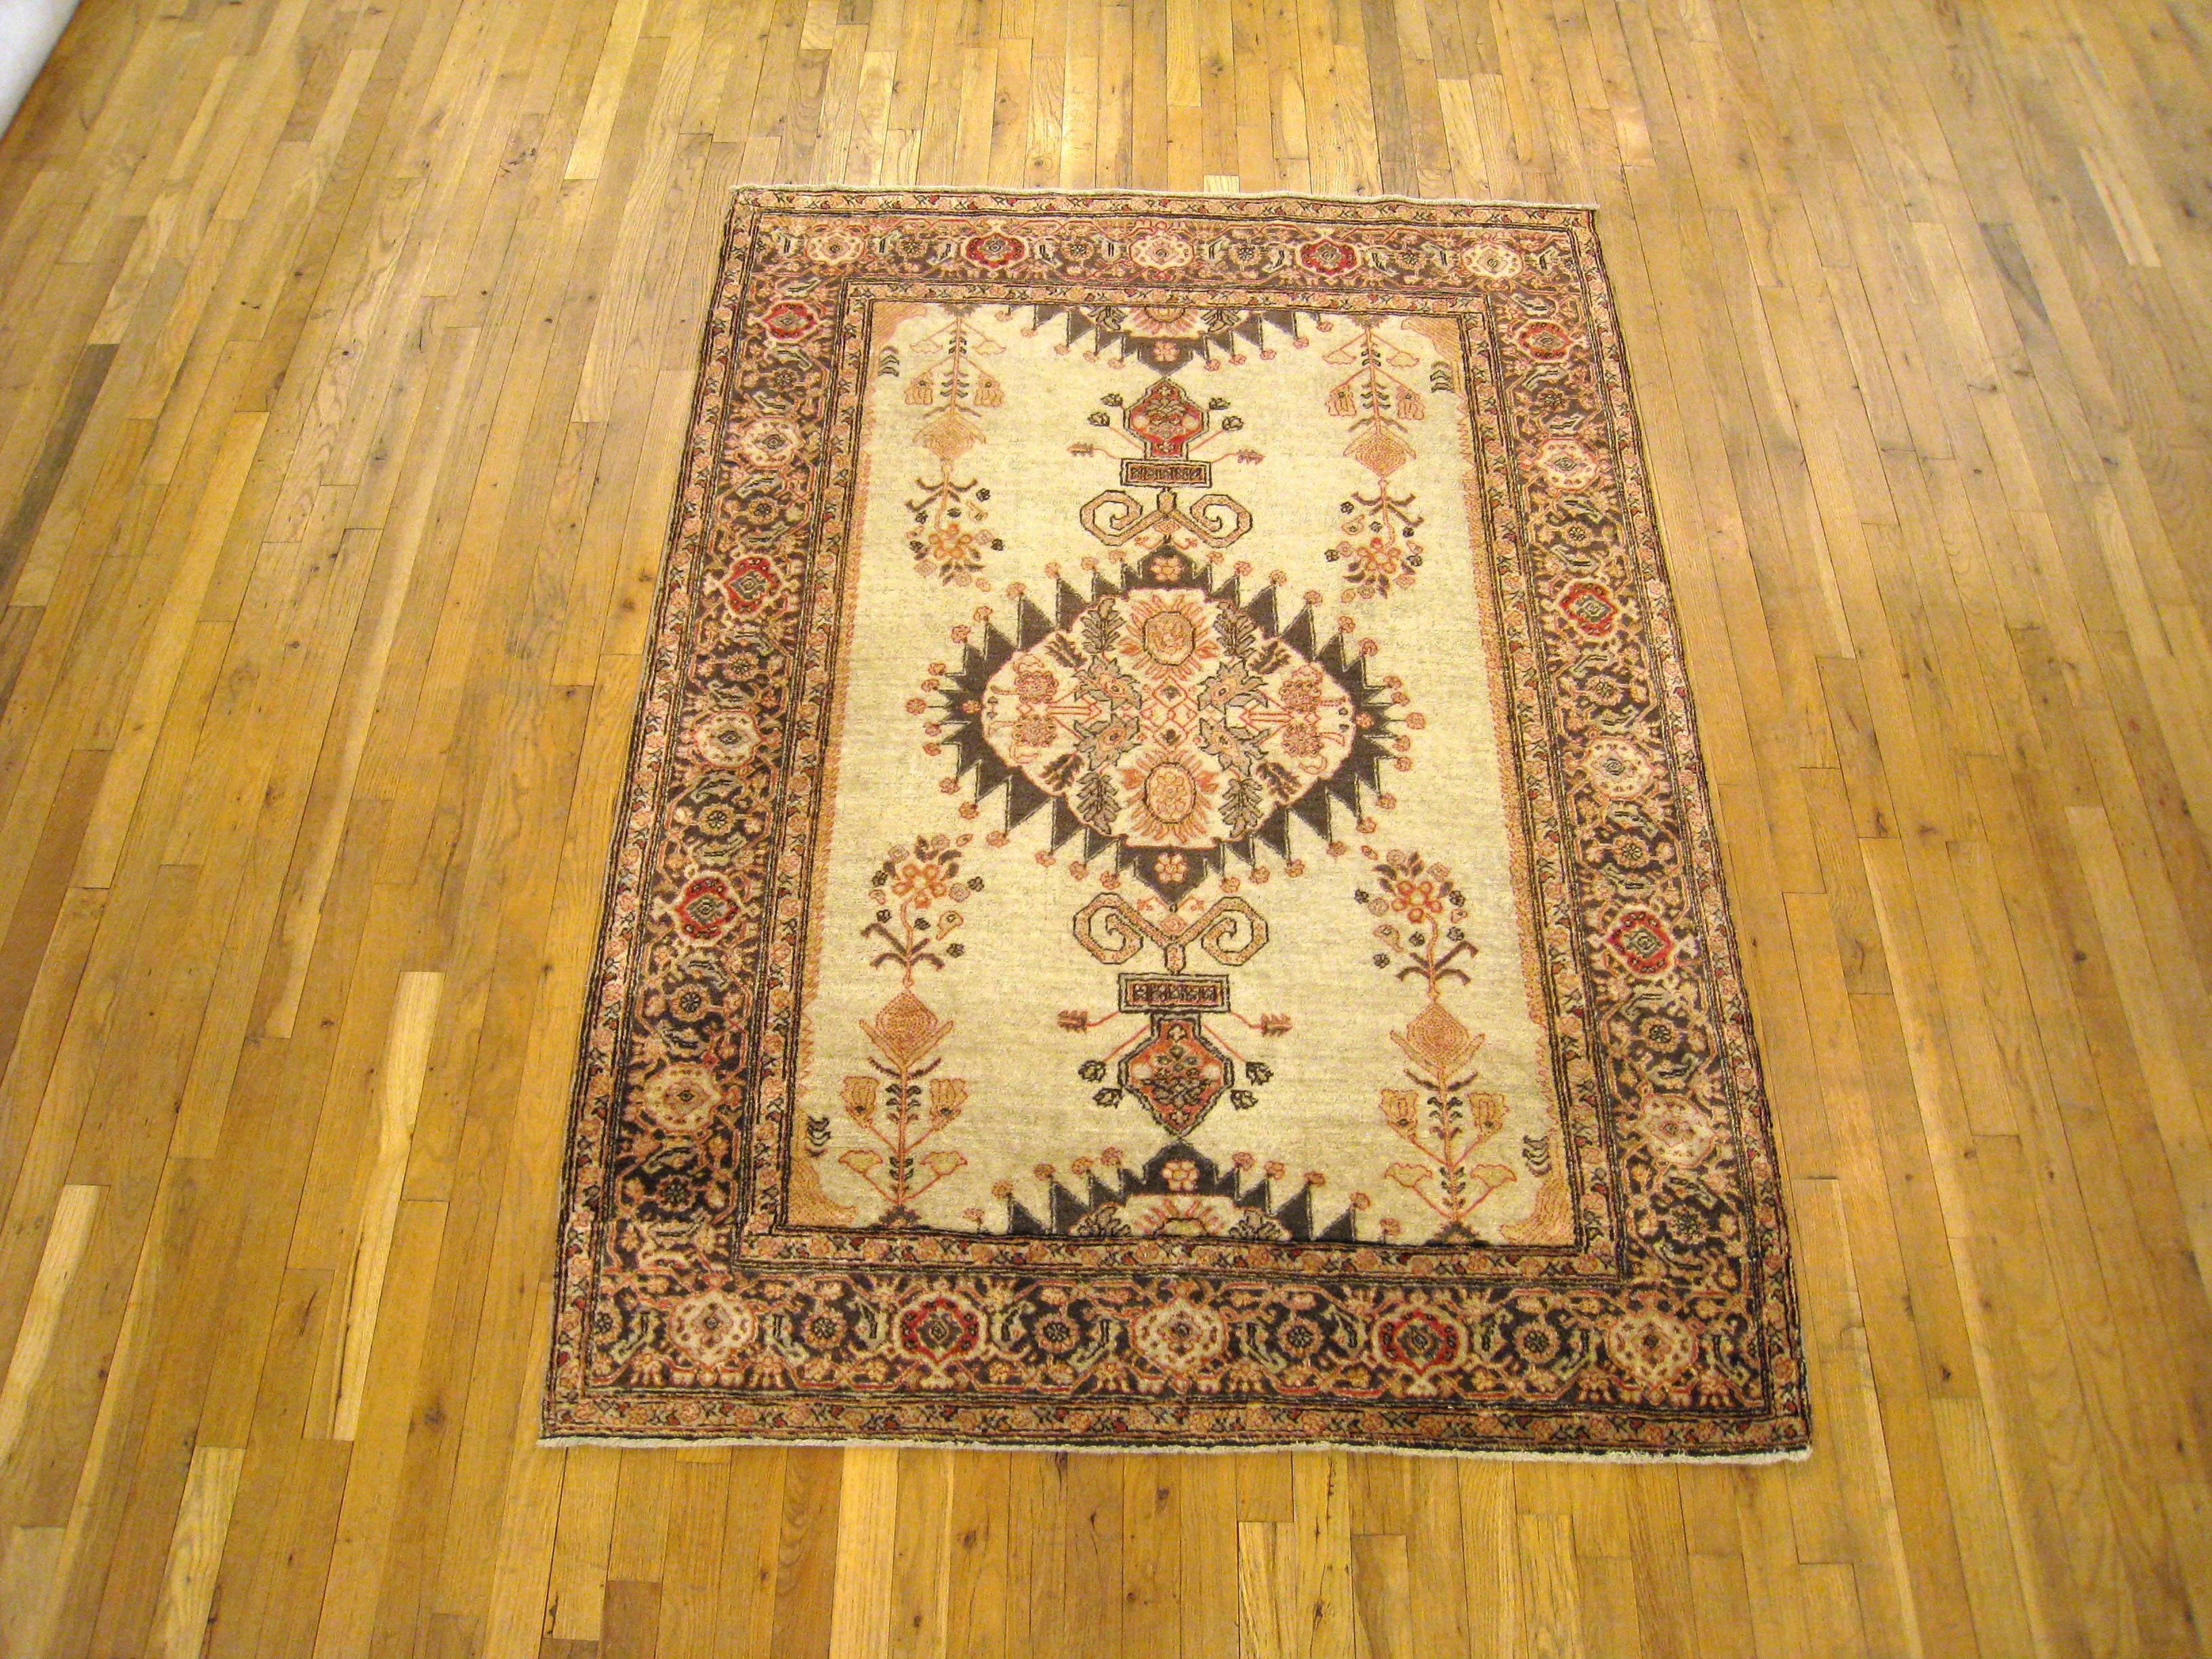 A small antique Persian Tabriz decorative rug, size 6'5 H x 4'6 W. This handsome hand-woven oriental carpet features a central lozenge medallion on a softly hued ivory field, with earth tones a subtle colors throughout. Wool pile with a short nap